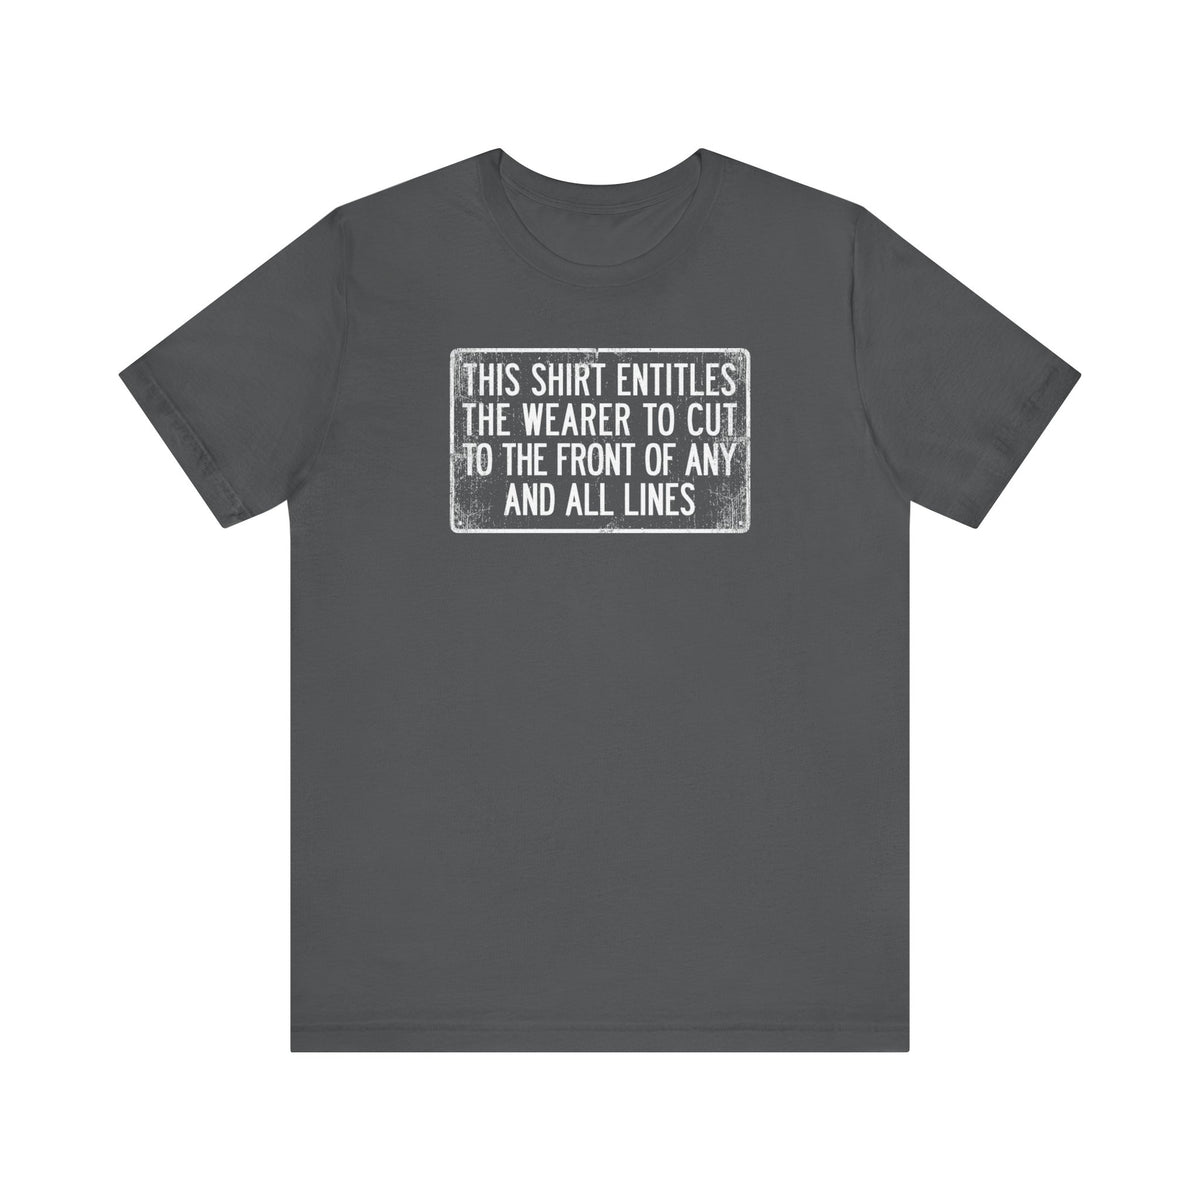 This Shirt Entitles The Wearer To Cut To The Front Of Any And All Lines - Men's T-Shirt